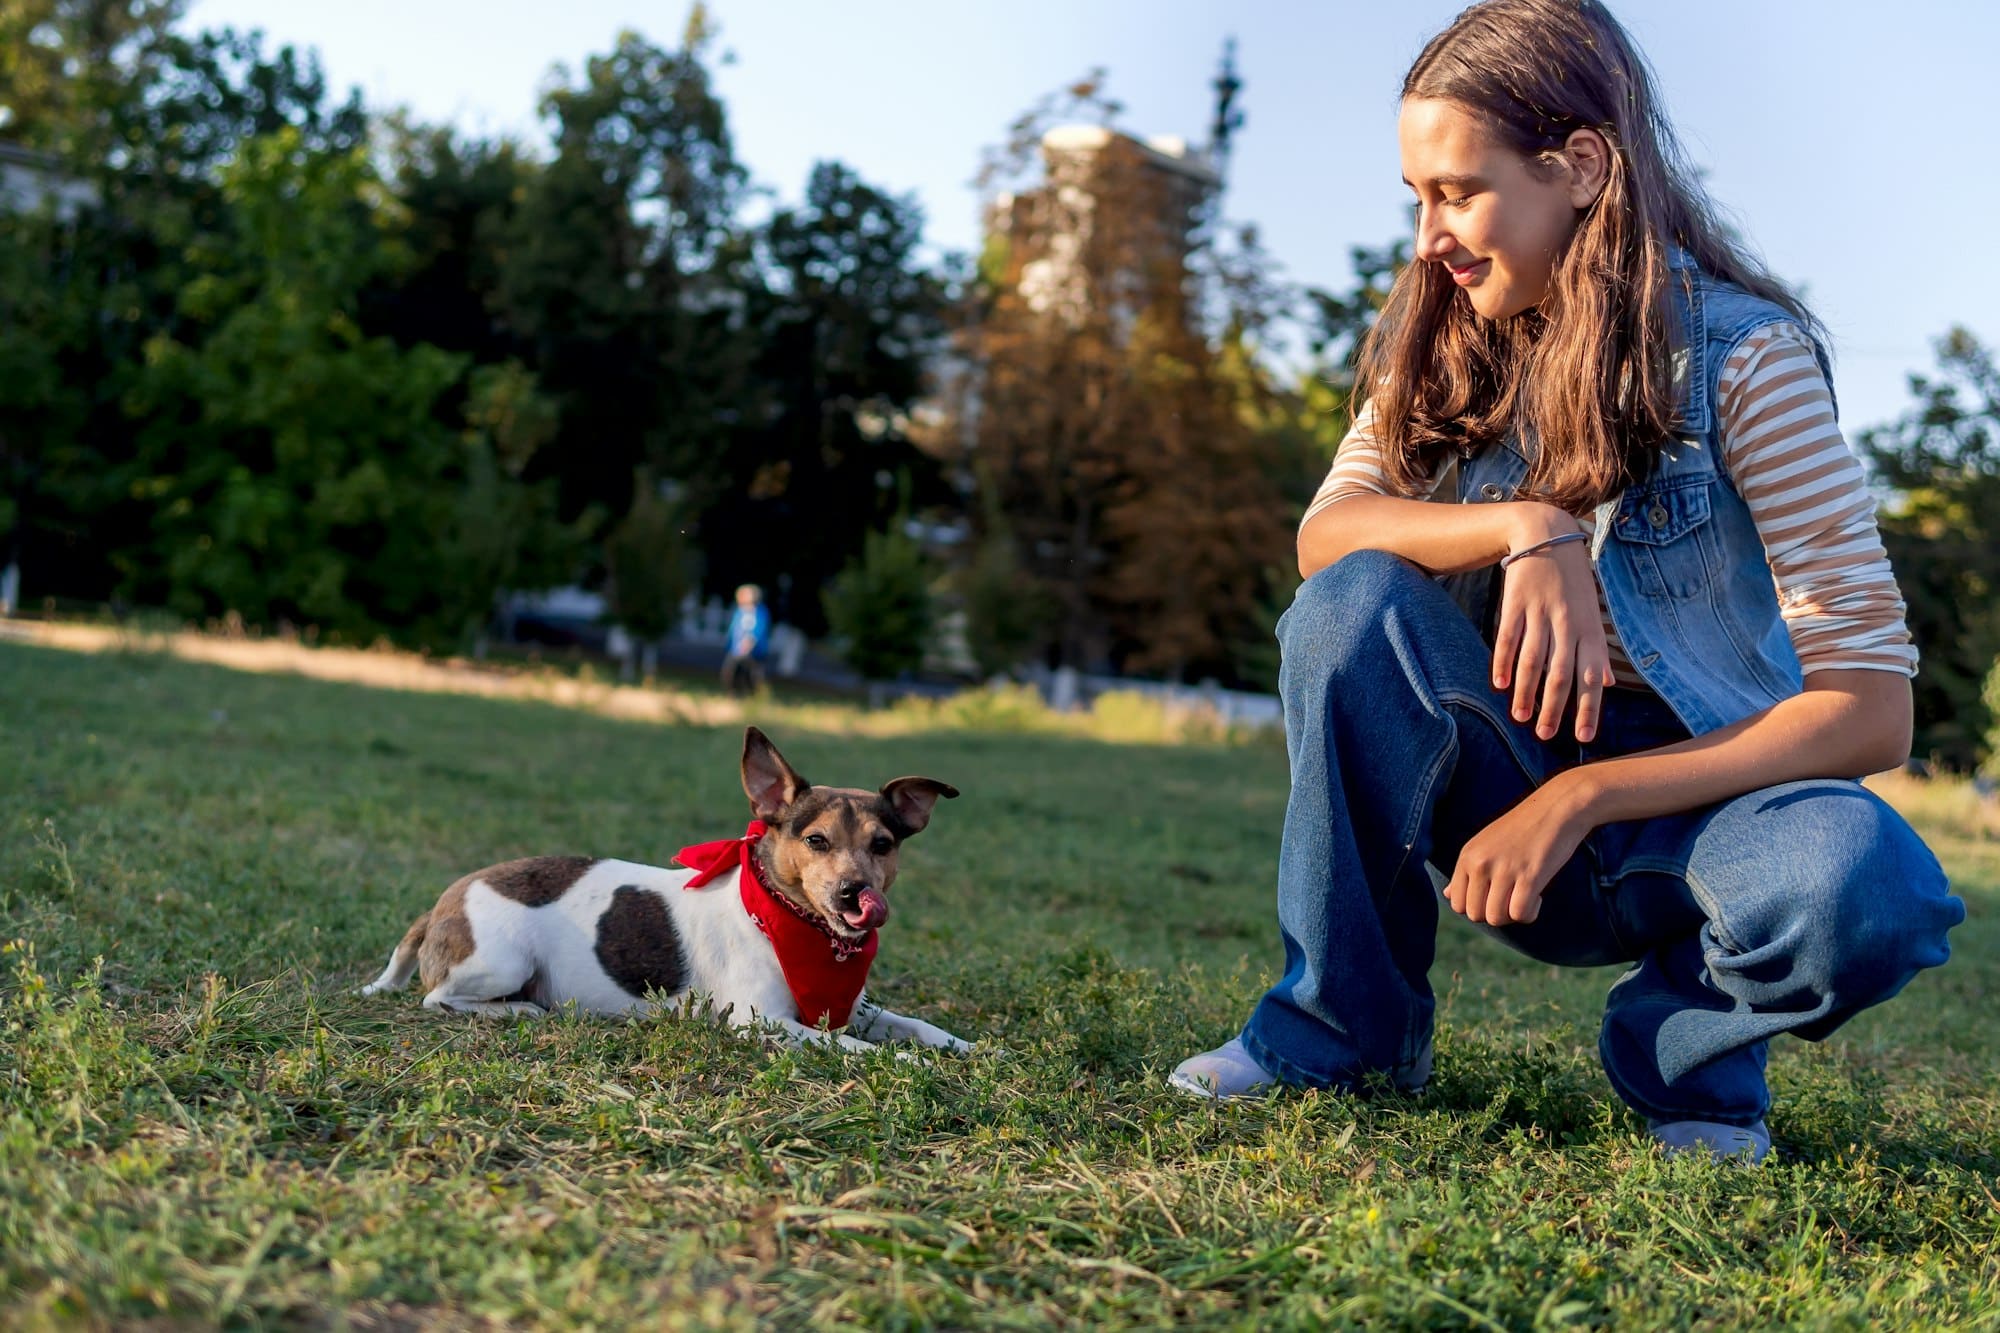 A teenage girl trains a cute pet dog jack russell on the grass in a doggy park in the autumn evening